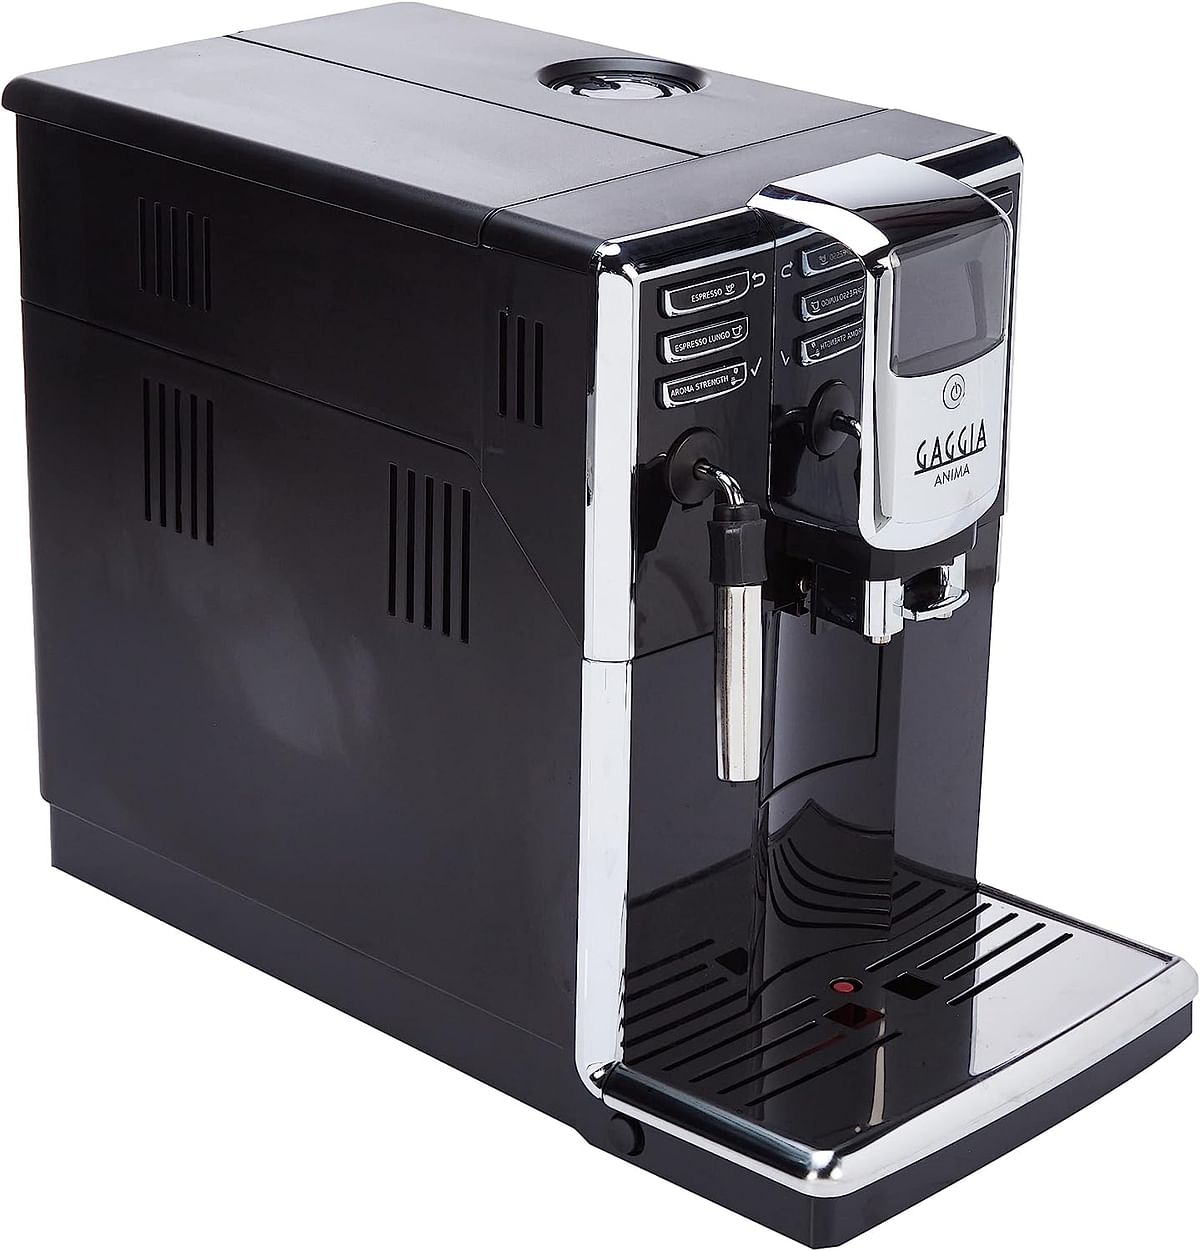 Gaggia Anima Class | Super Automatic Bean to Cup Espresso and Coffee Machine Made In Italy | Adjustable Grinders | Milk Frother, Cappuccino, Latte Macchiato and Caffe Lungo Maker for Home and Office